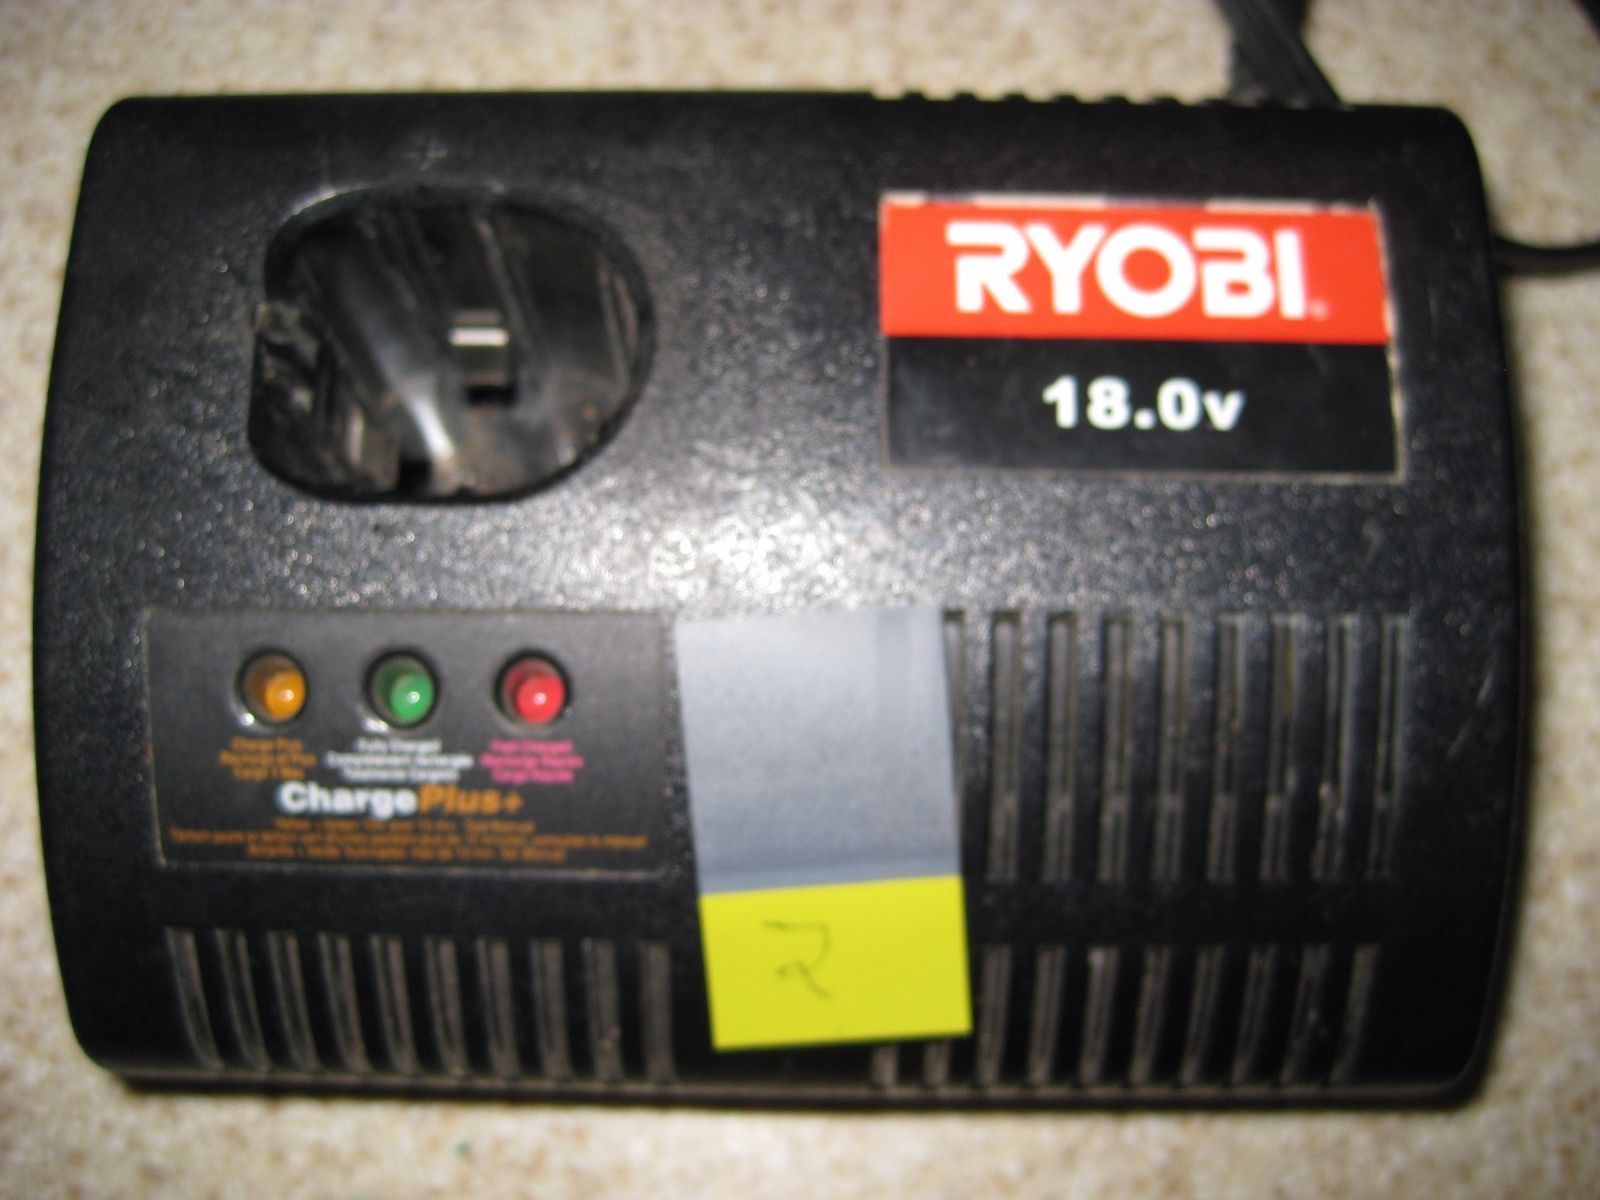 Ryobi Charge Plus 18V battery charger - Power Tool Batteries